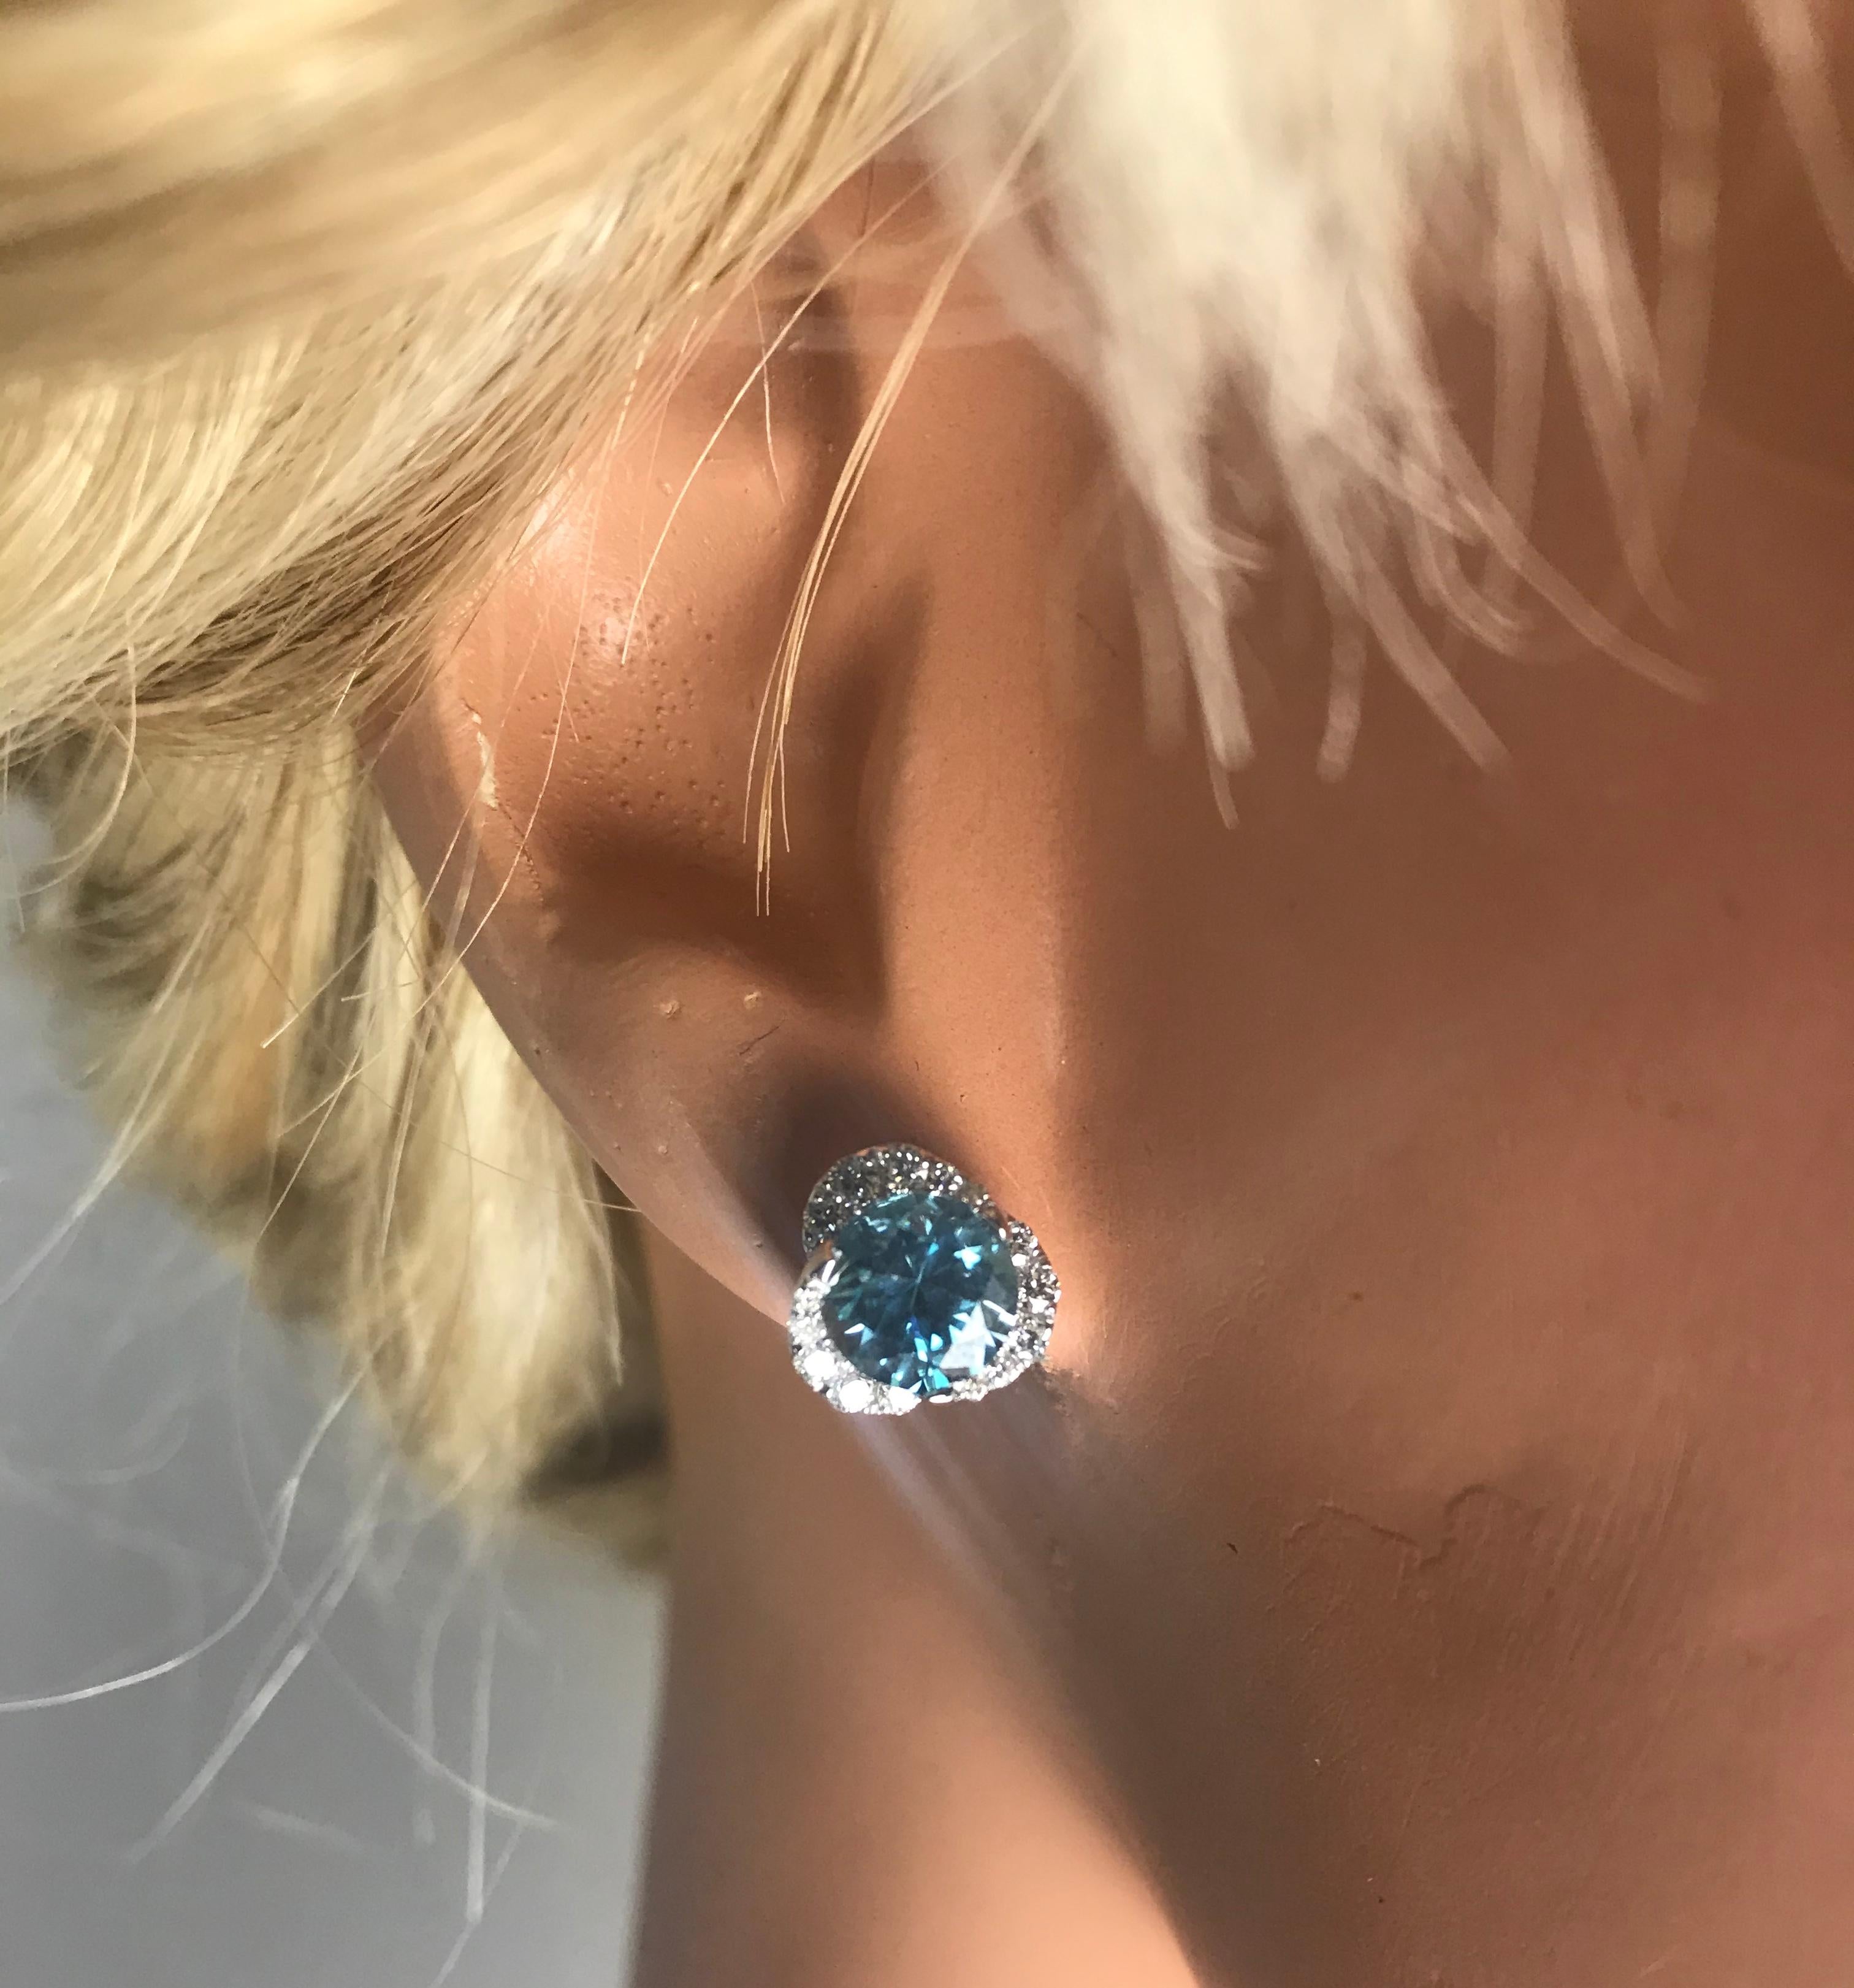 Contemporary DiamondTown 2.66 Carat Round Blue Zircon and Diamond Earrings in 14k White Gold For Sale